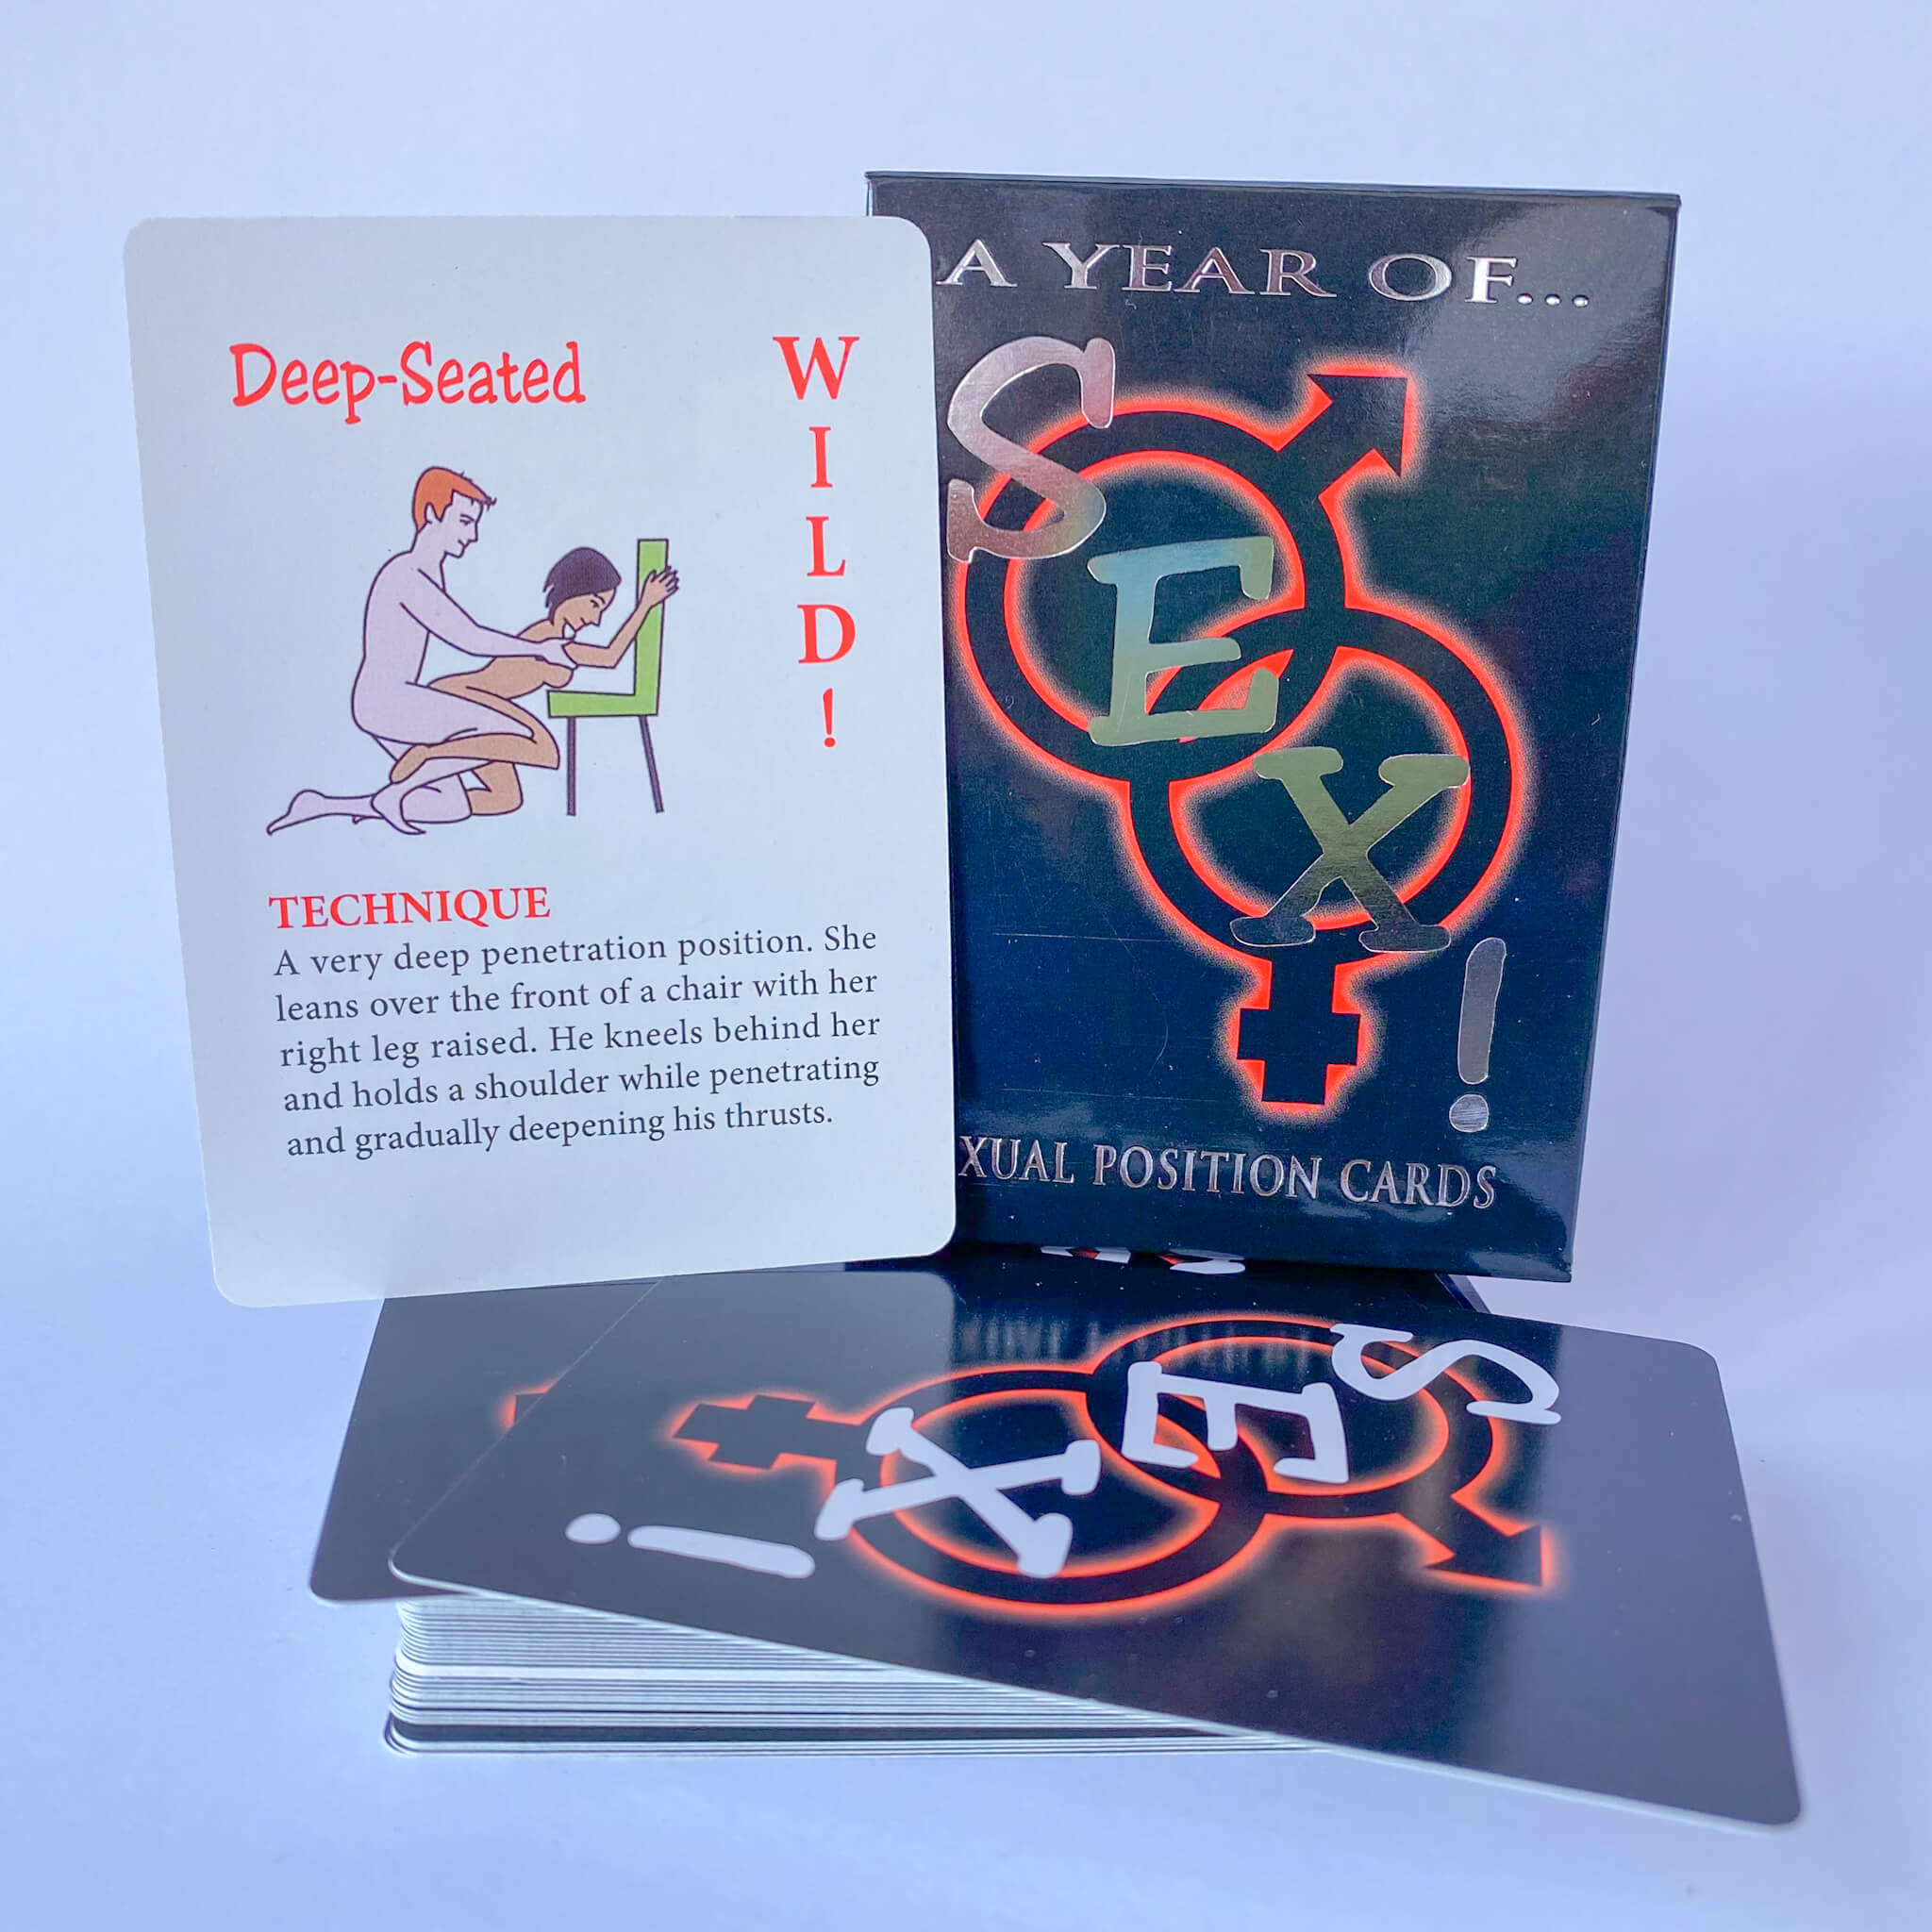 A Year Of Sex Sexual Position Cards 4play Essentials 1814